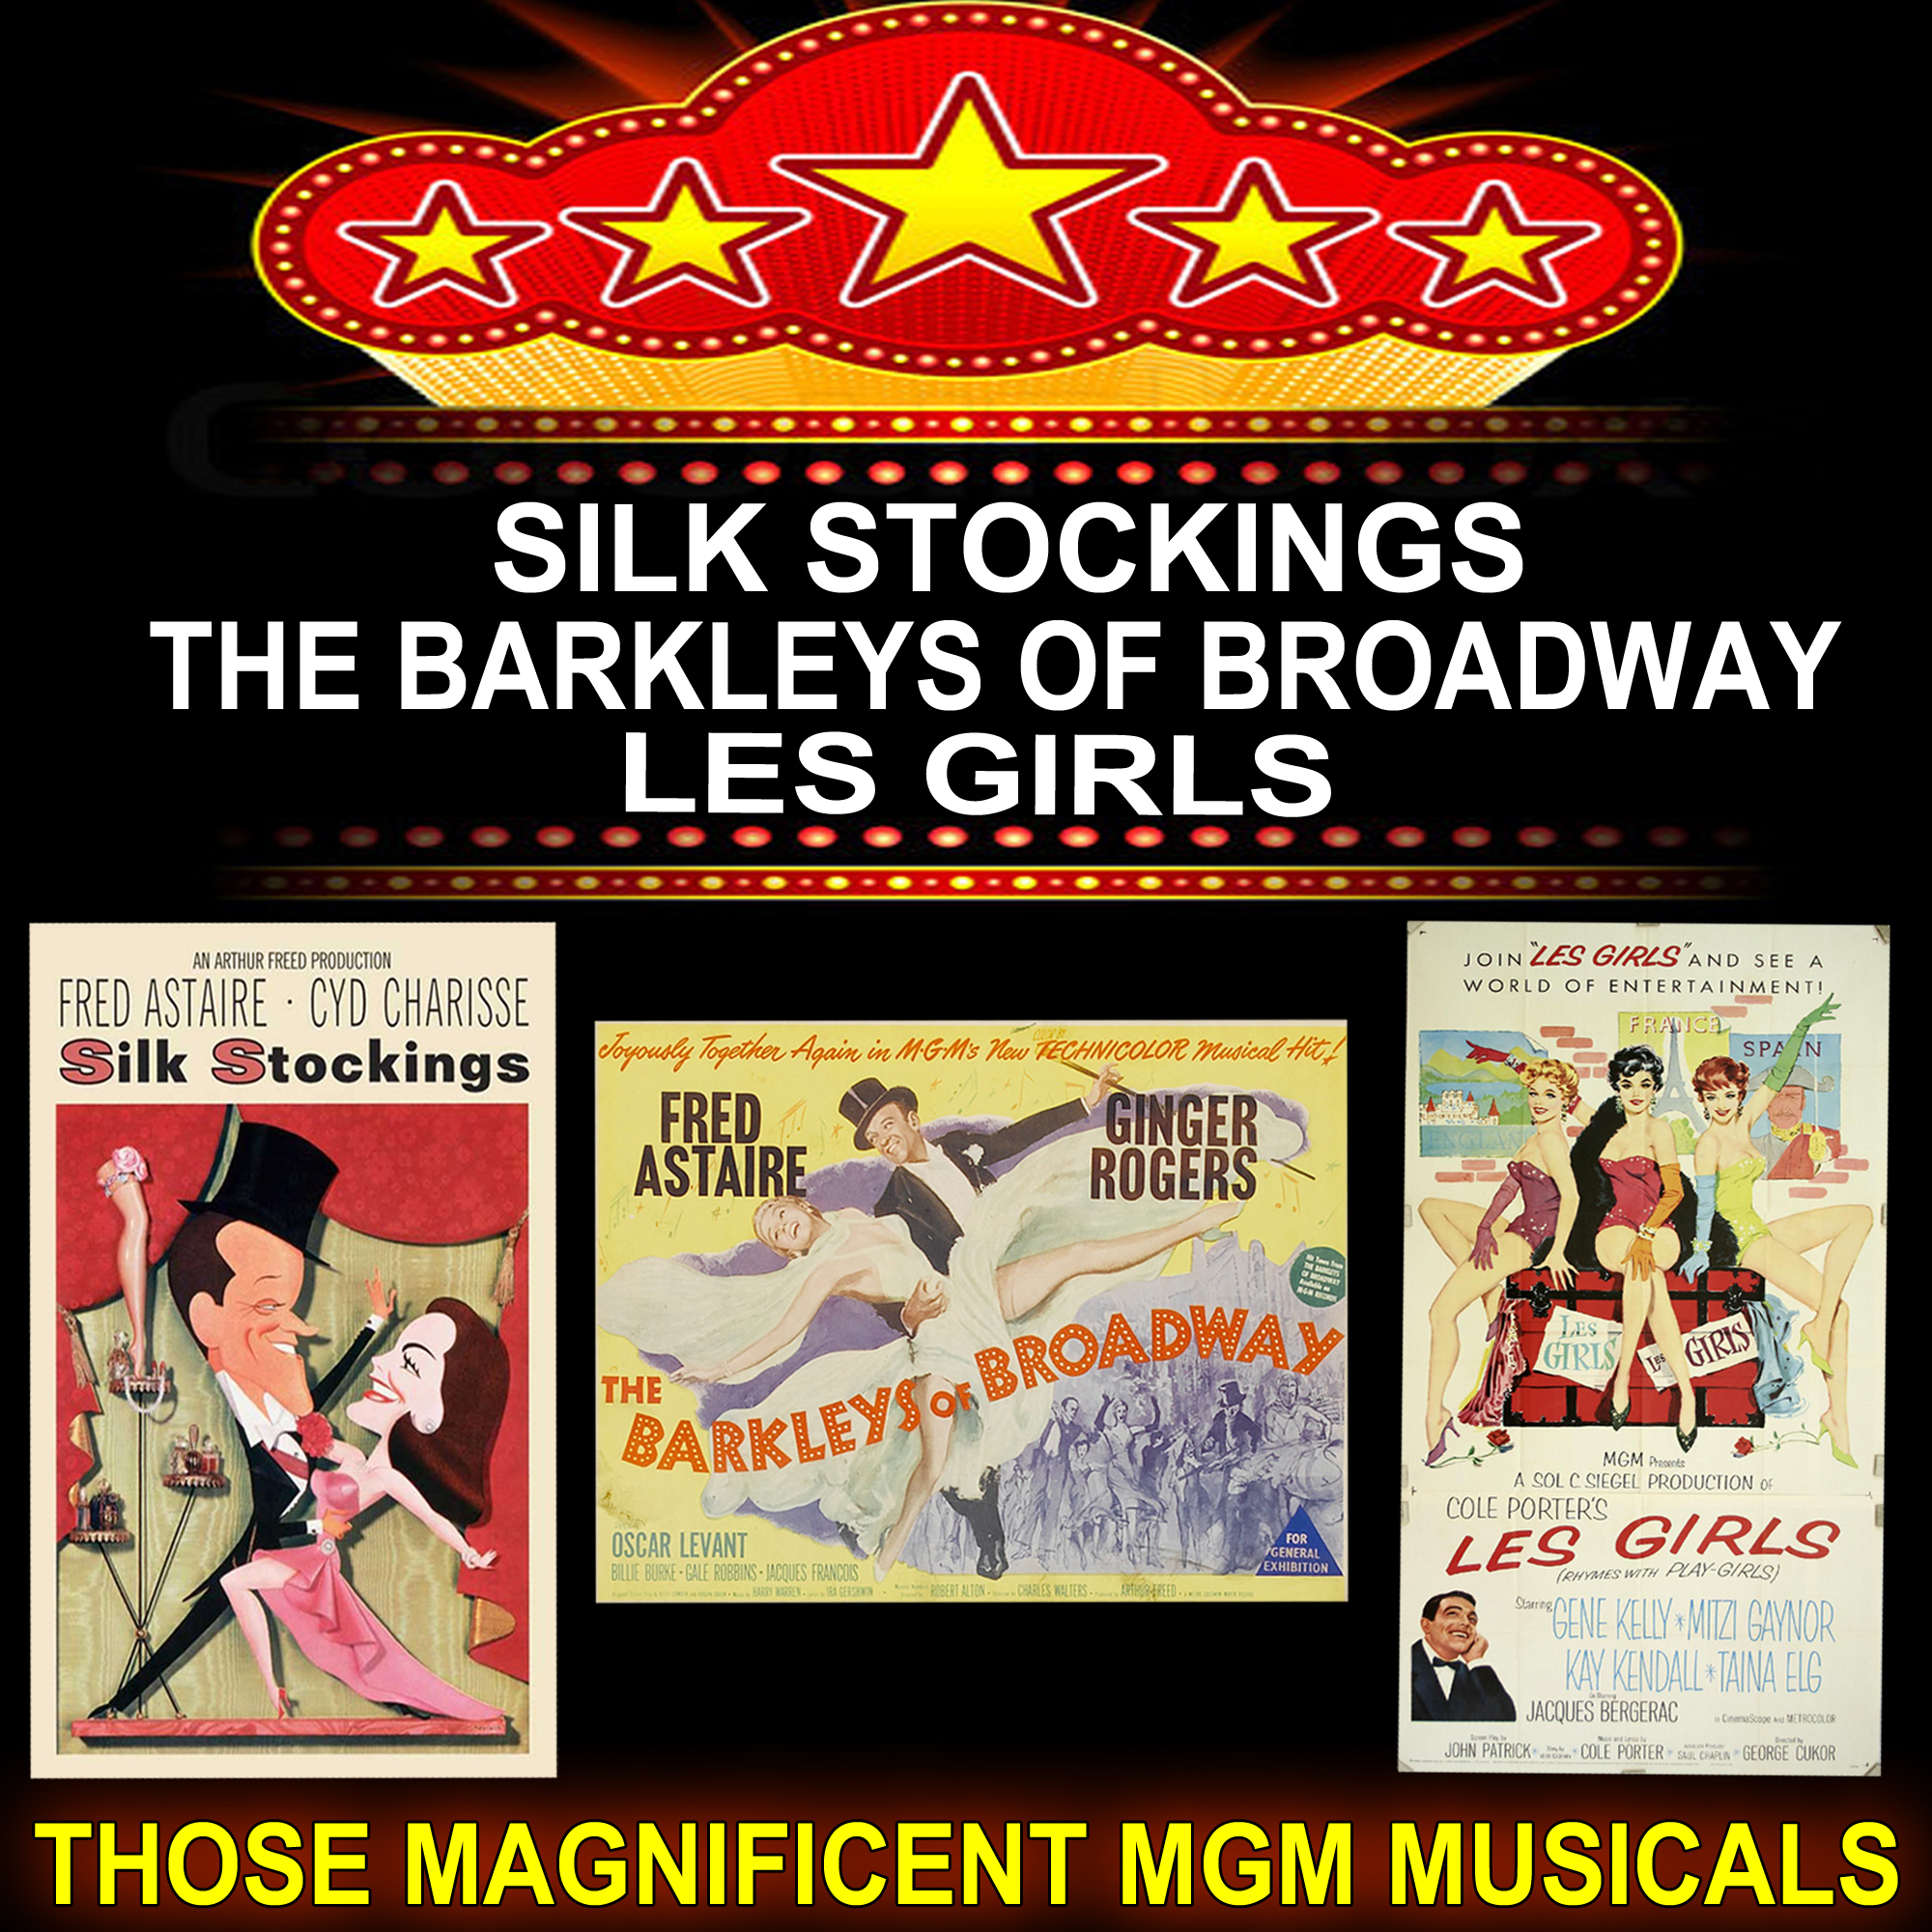 Those Magnificent MGM Musicals: Silk Stockings, The Barkleys of Broadway and Les Girls